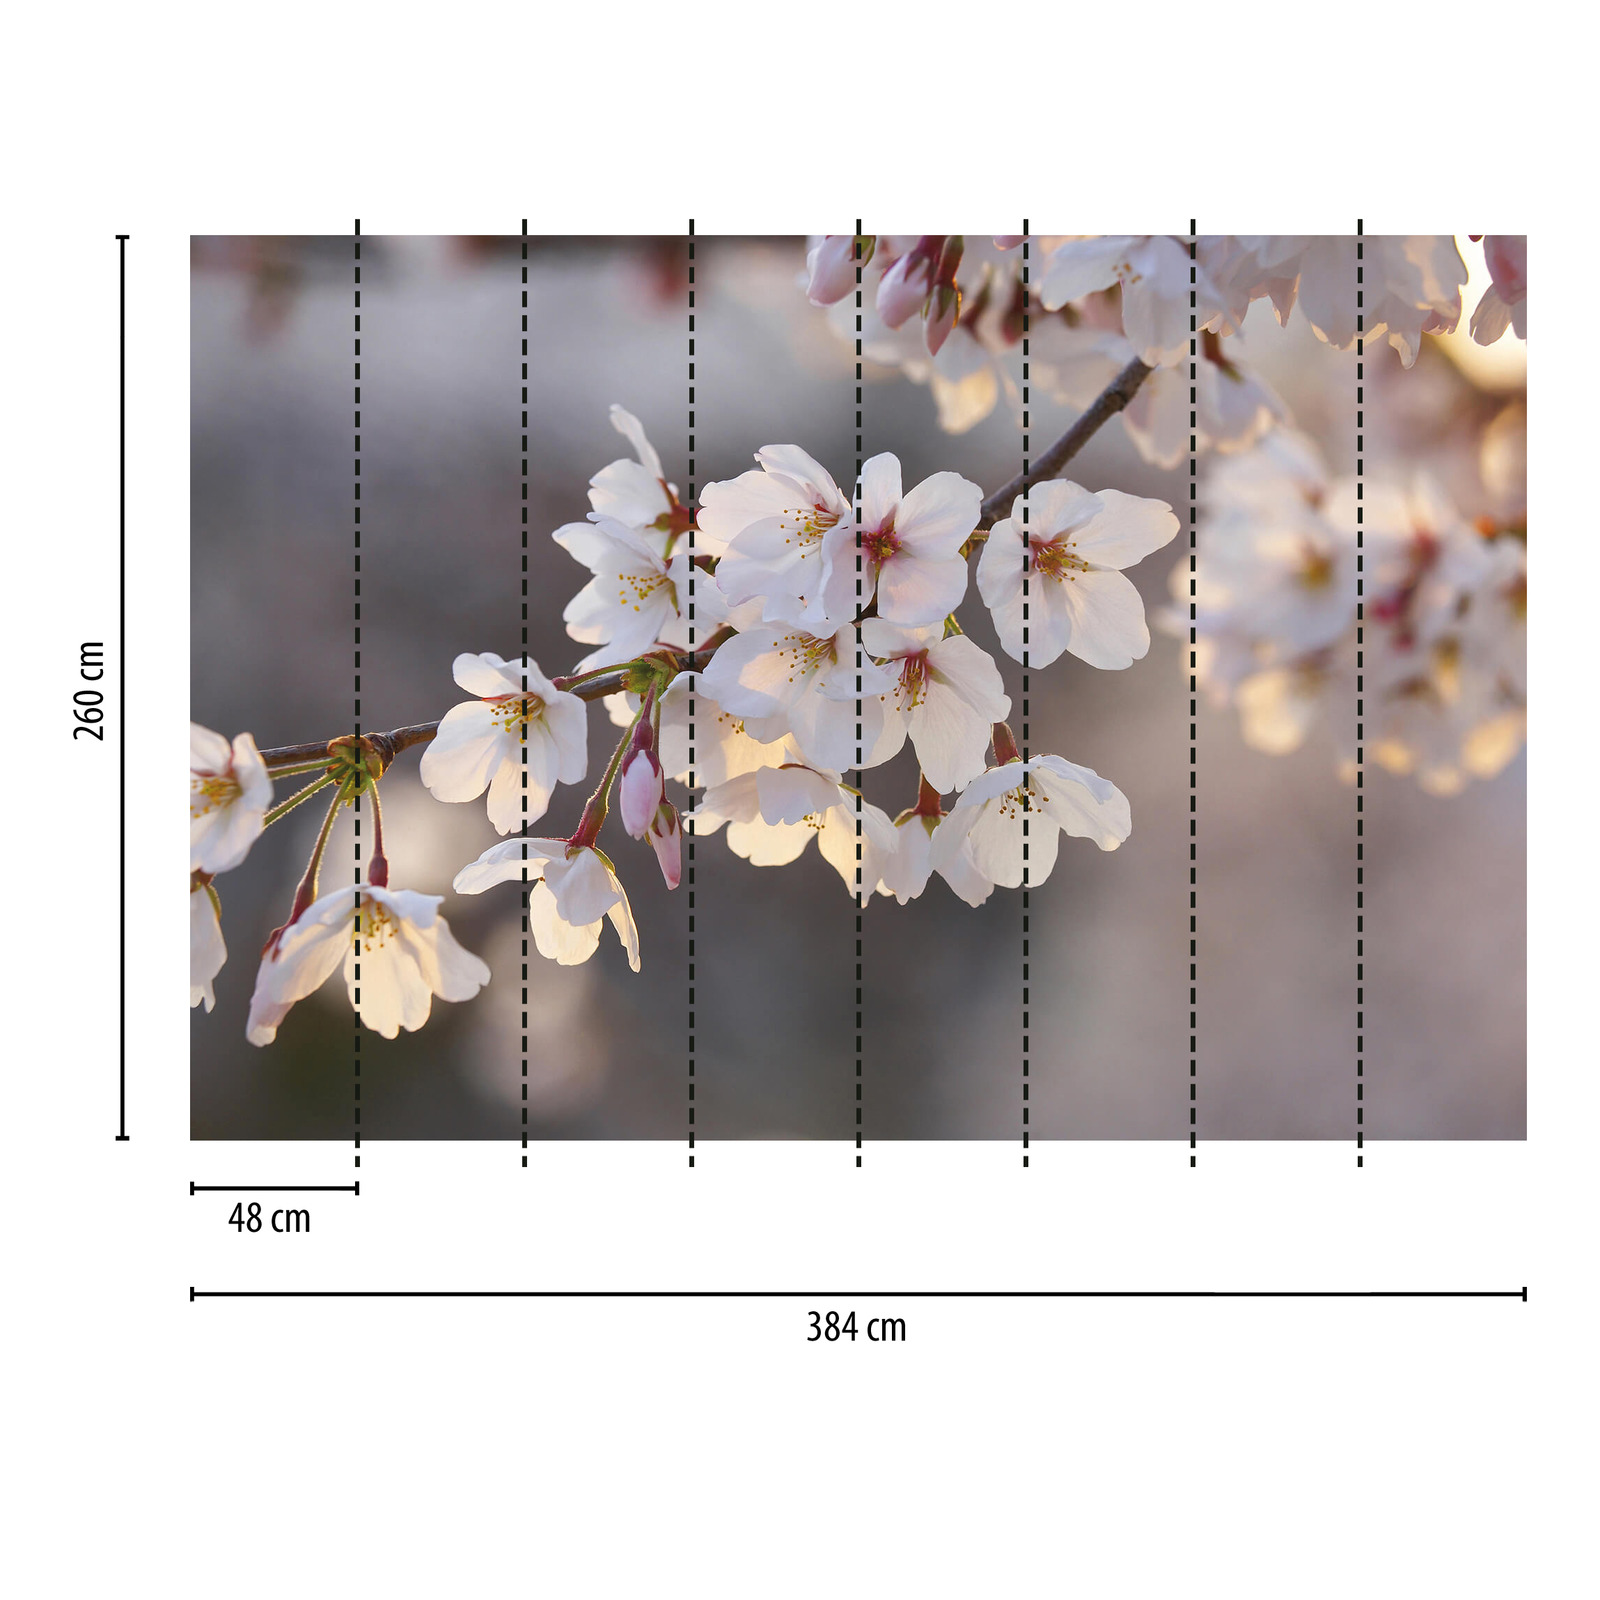             Cherry blossoms mural - white, pink, brown
        